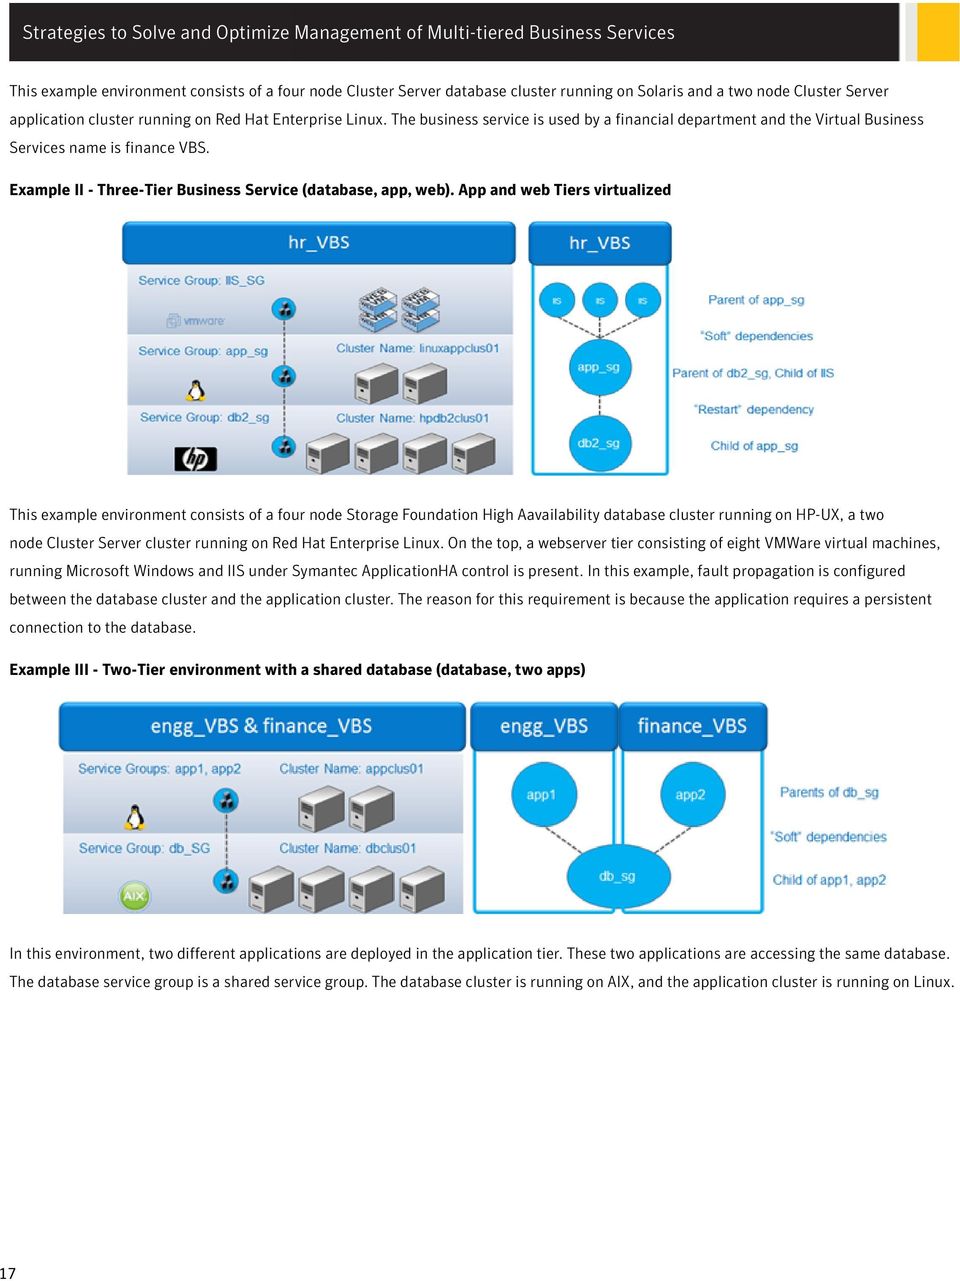 App and web Tiers virtualized This example environment consists of a four node Storage Foundation High Aavailability database cluster running on HP-UX, a two node Cluster Server cluster running on